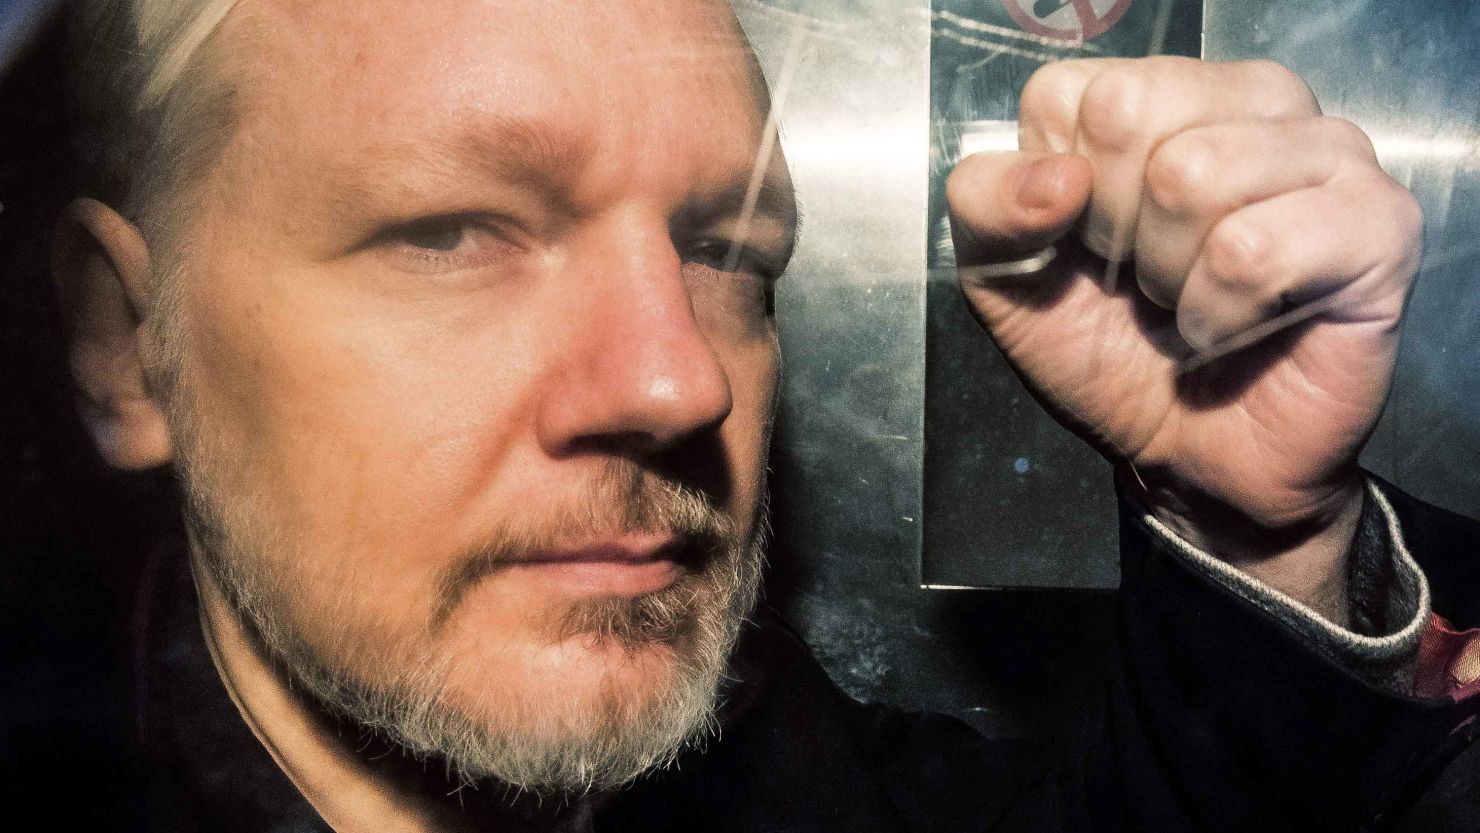 Assange gestures from the window of a prison van on May 1, 2019.